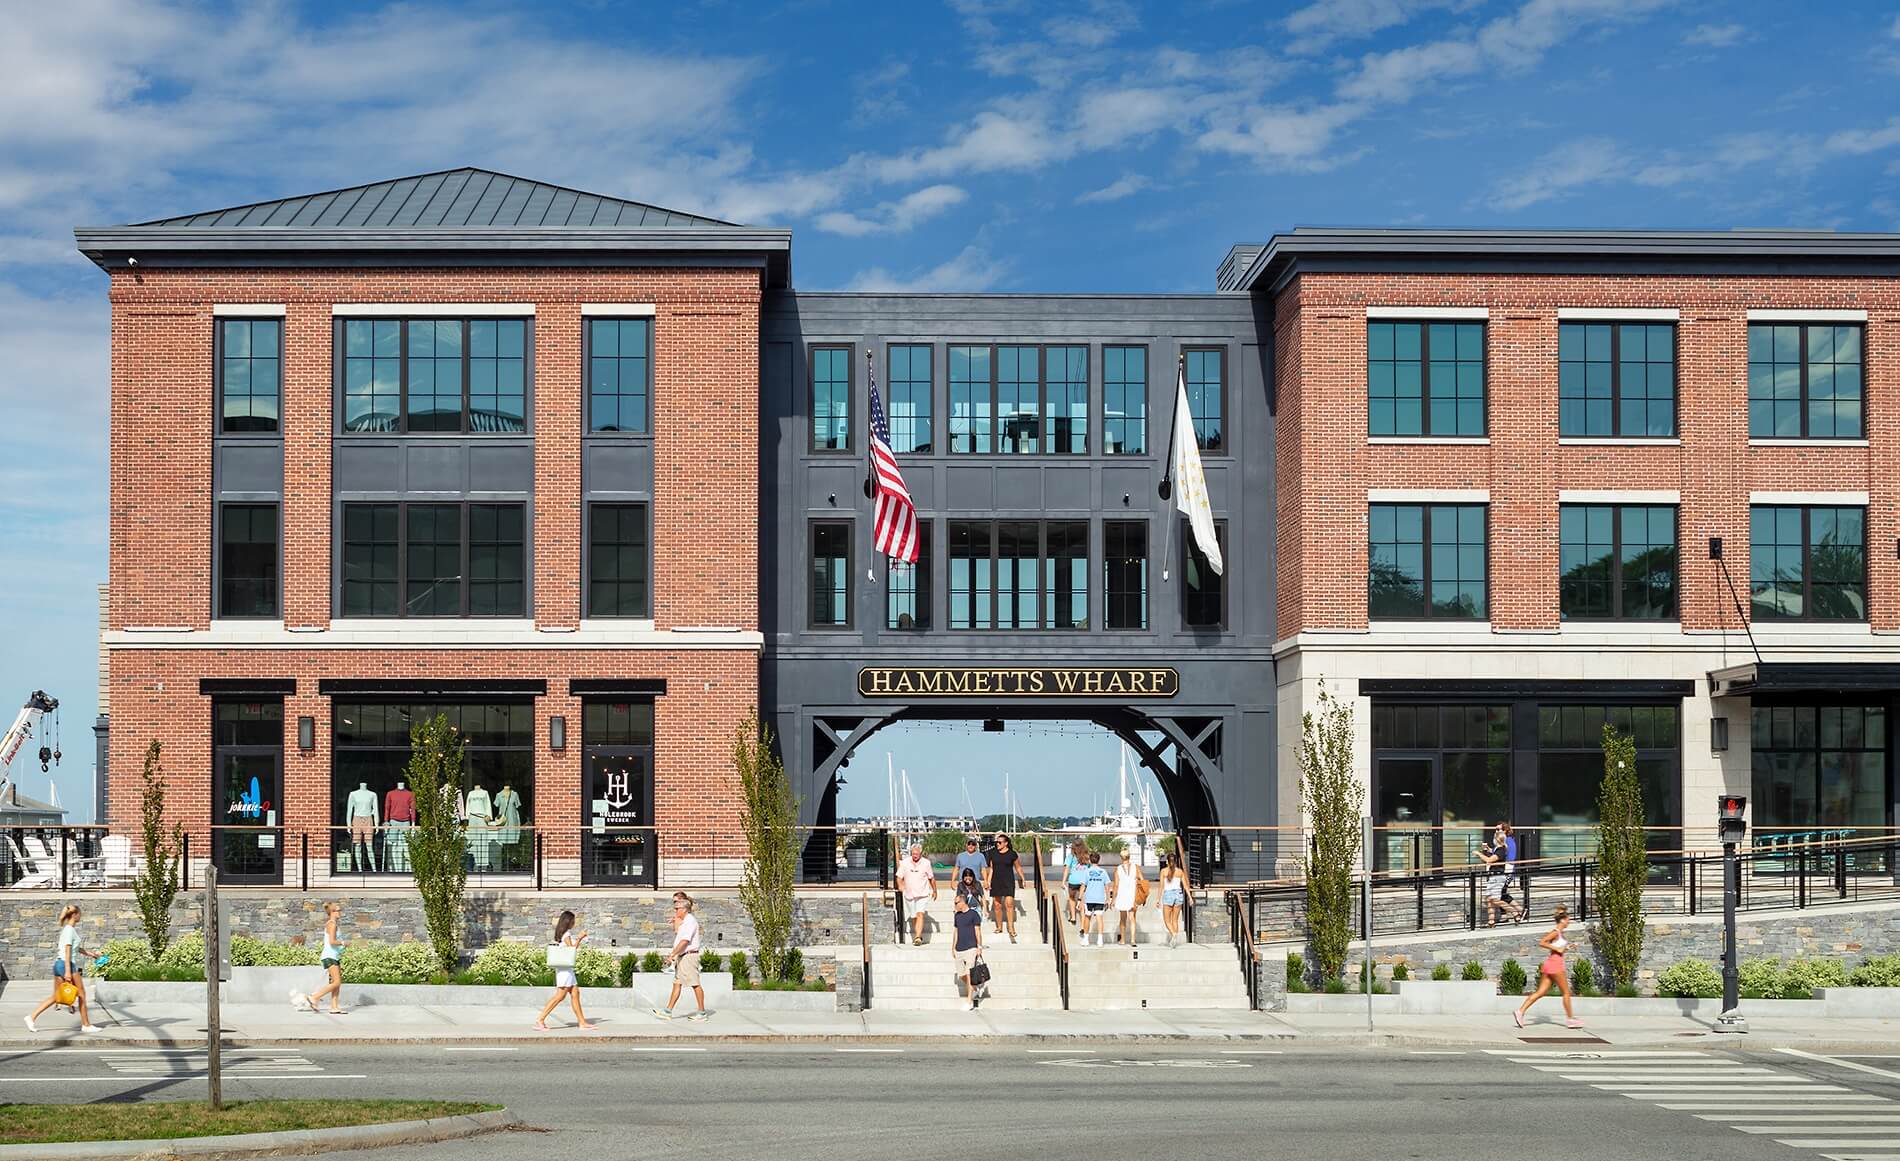 Modern two-story brick building with large glass windows, featuring an American flag and a sign that reads "Hammer's Wharf Hotel," with people walking in front. Located in Newport RI, this is